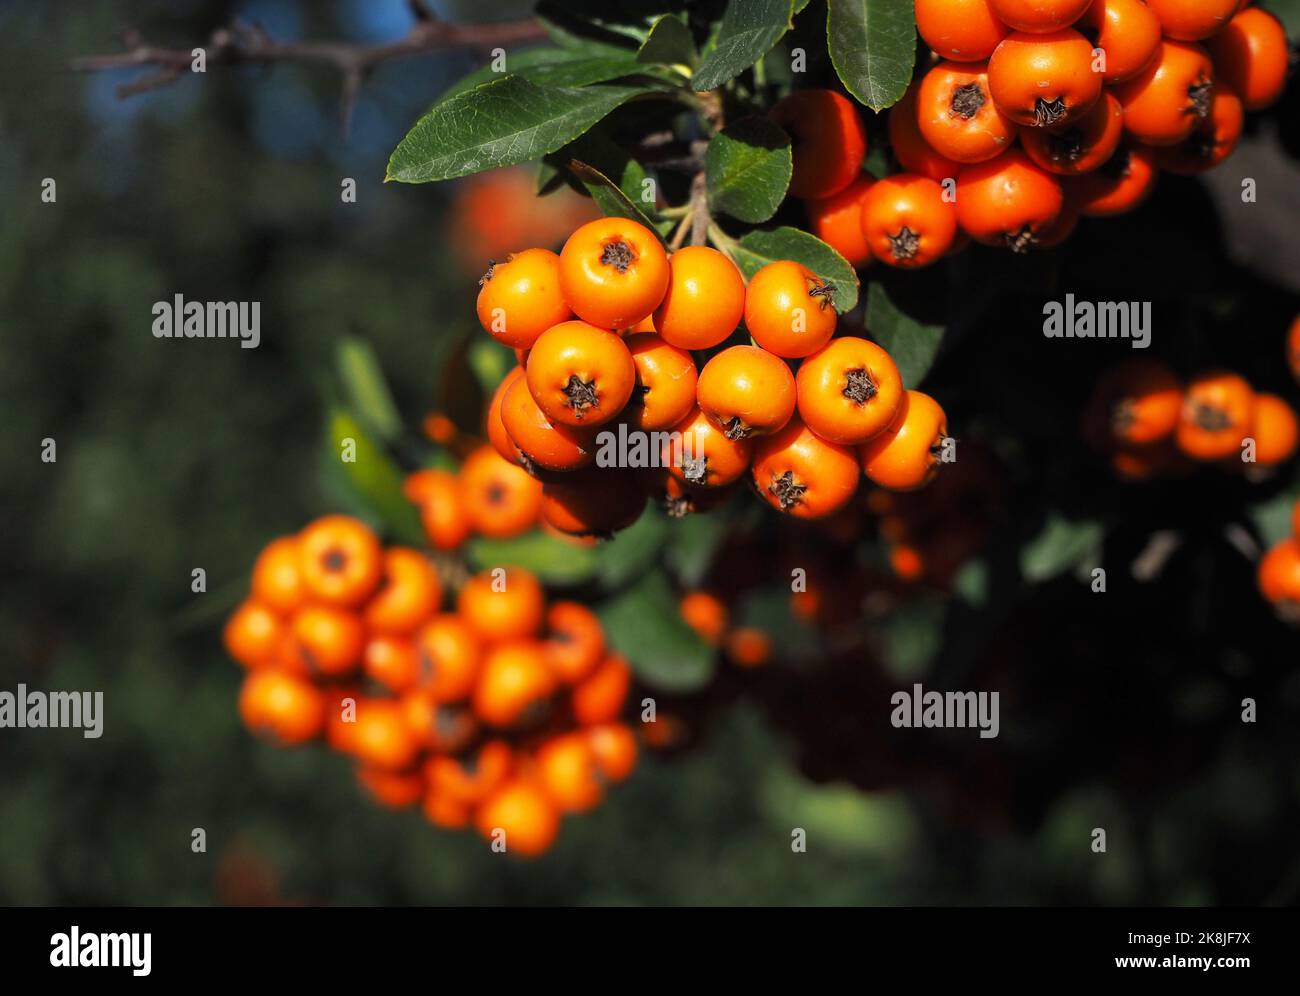 Red firethorn. Scarlet firethorn plant on branch with the dark background. Stock Photo